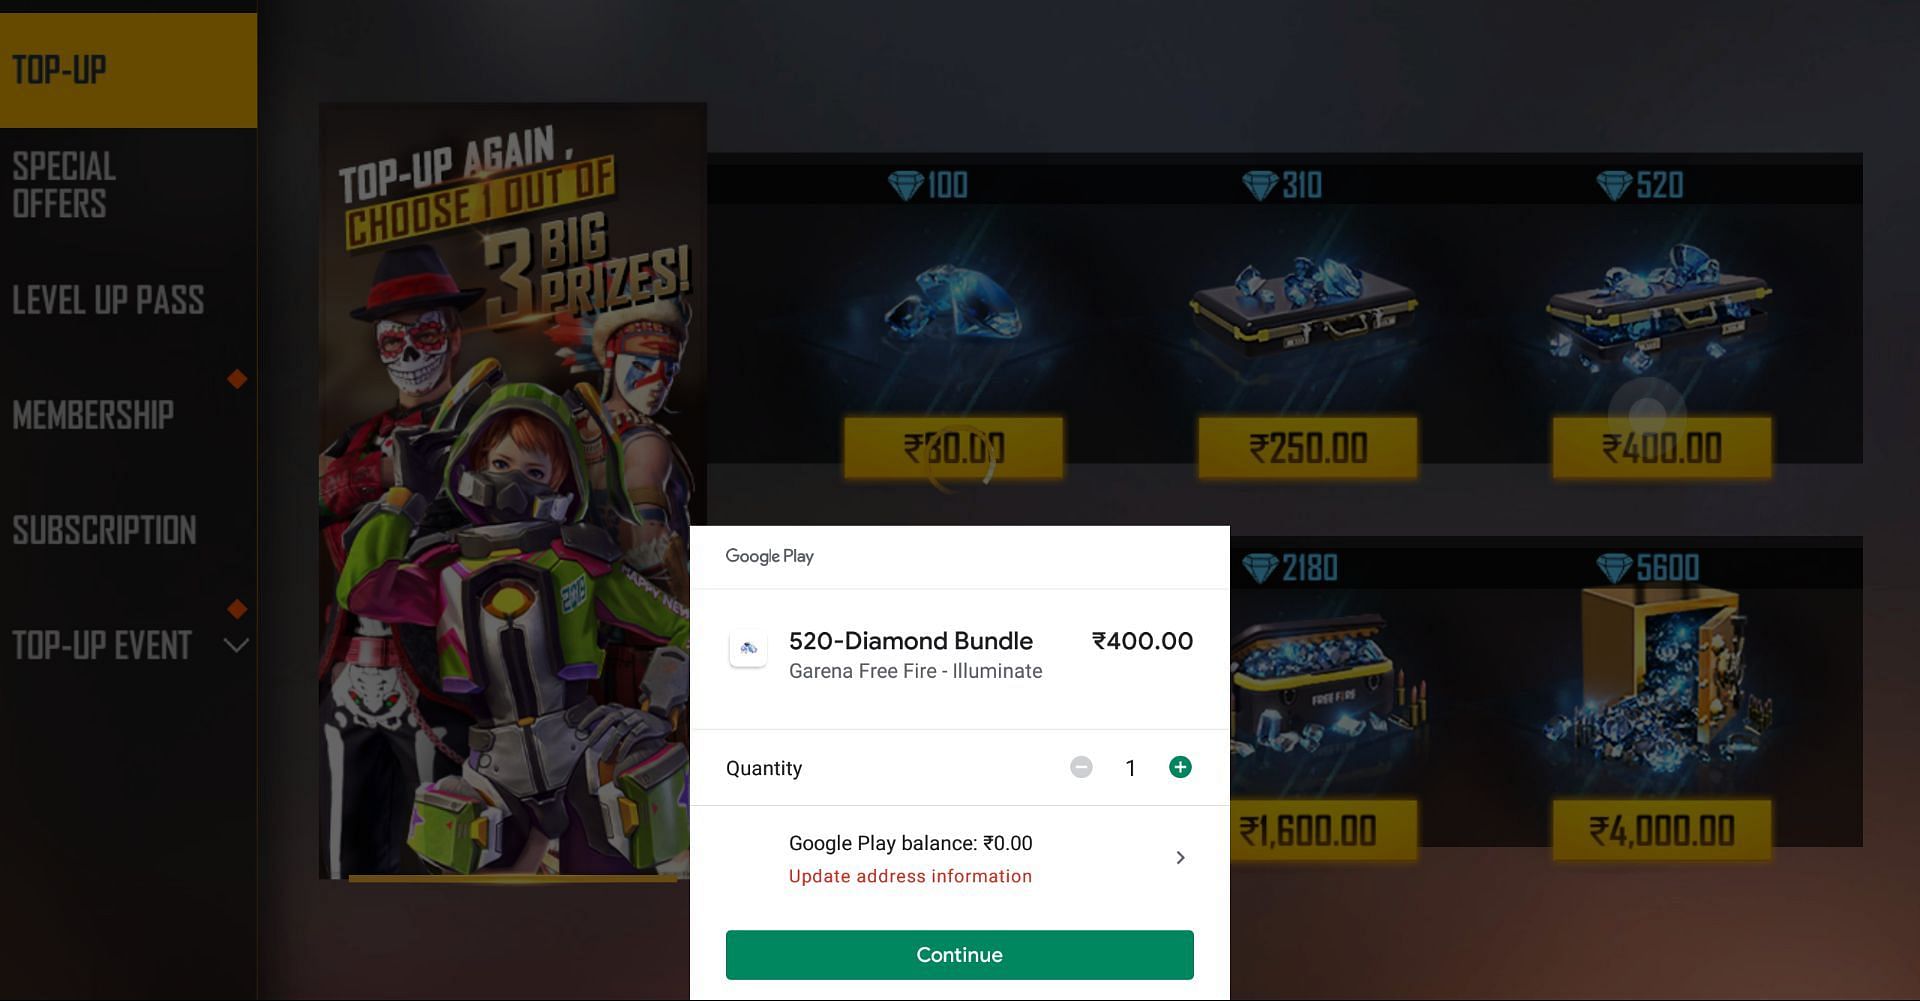 Payment can be completed (Image via Garena)